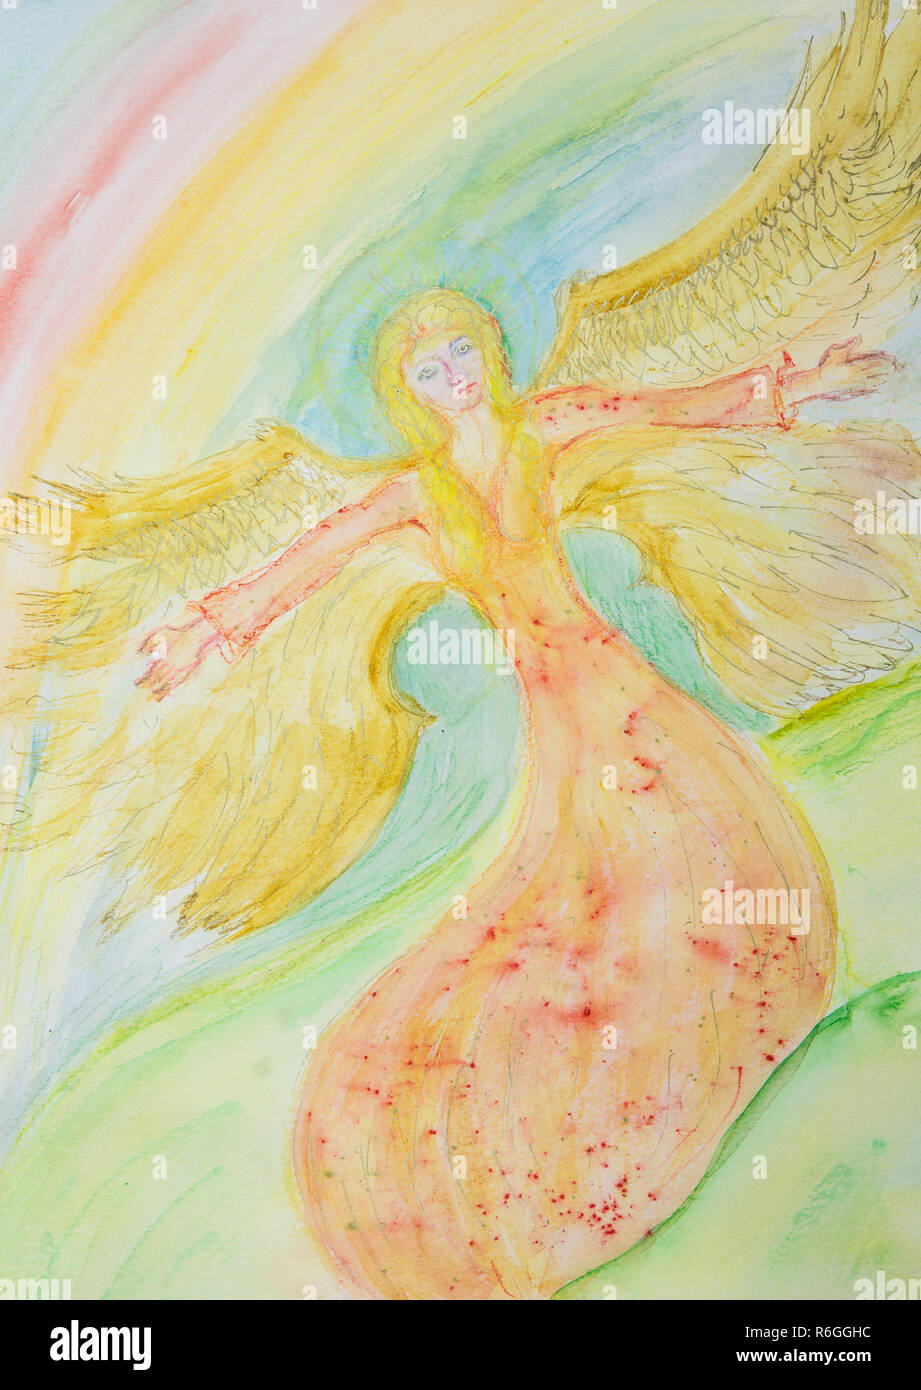 Flying feminine angel. The dabbing technique near the edges gives a soft focus effect due to the altered surface roughness of the paper. Stock Photo